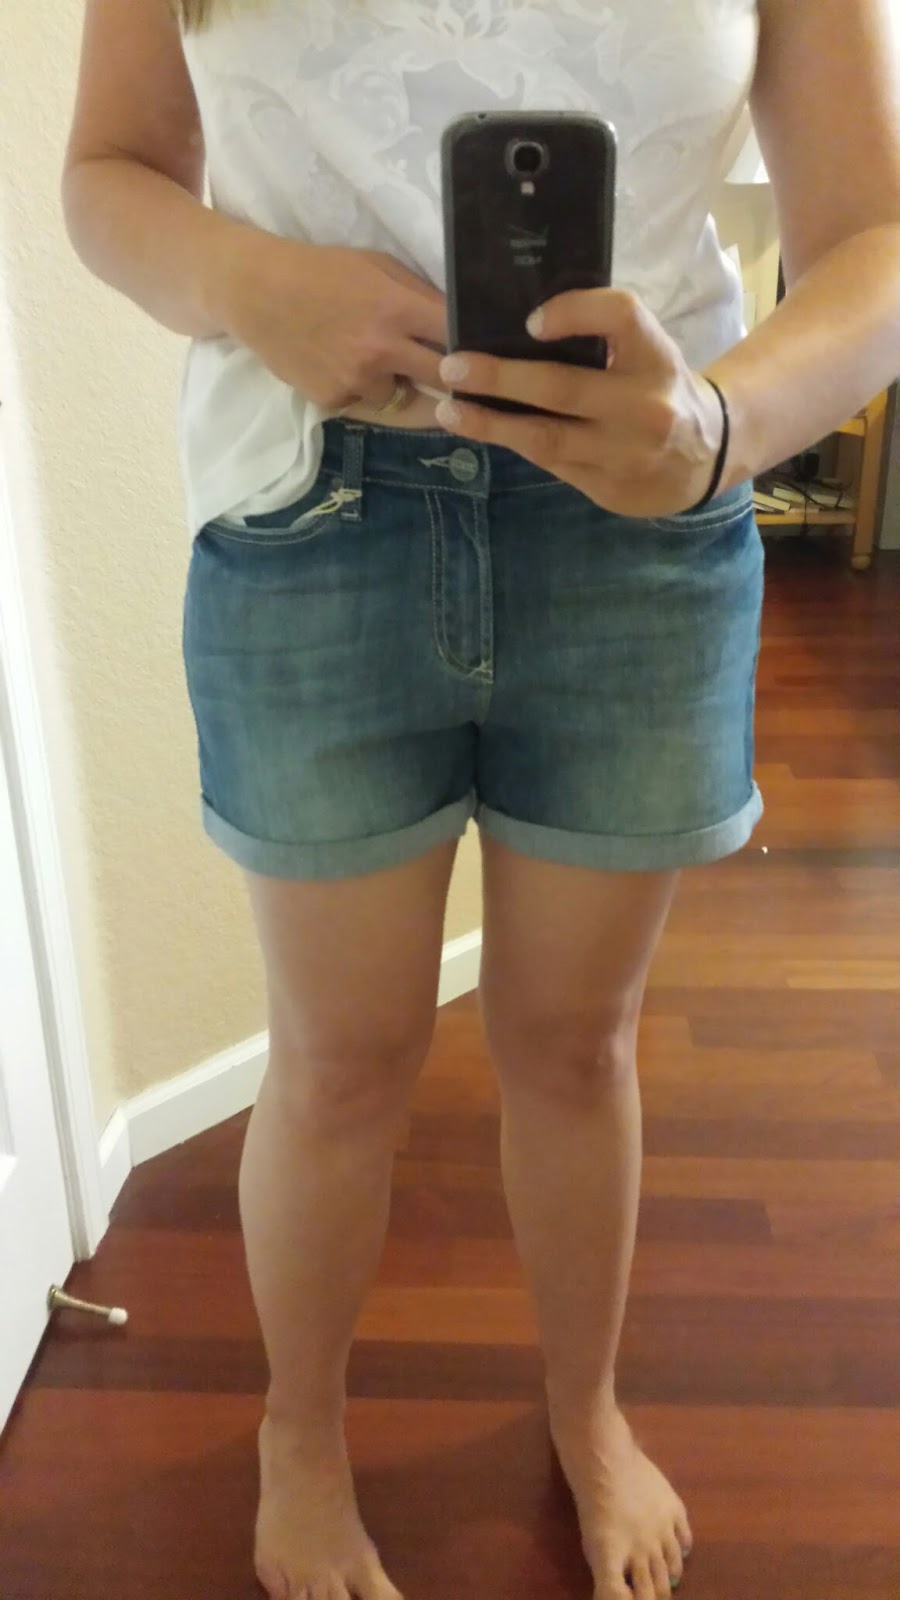 Nully Baby Blog: Stitch Fix Review #17